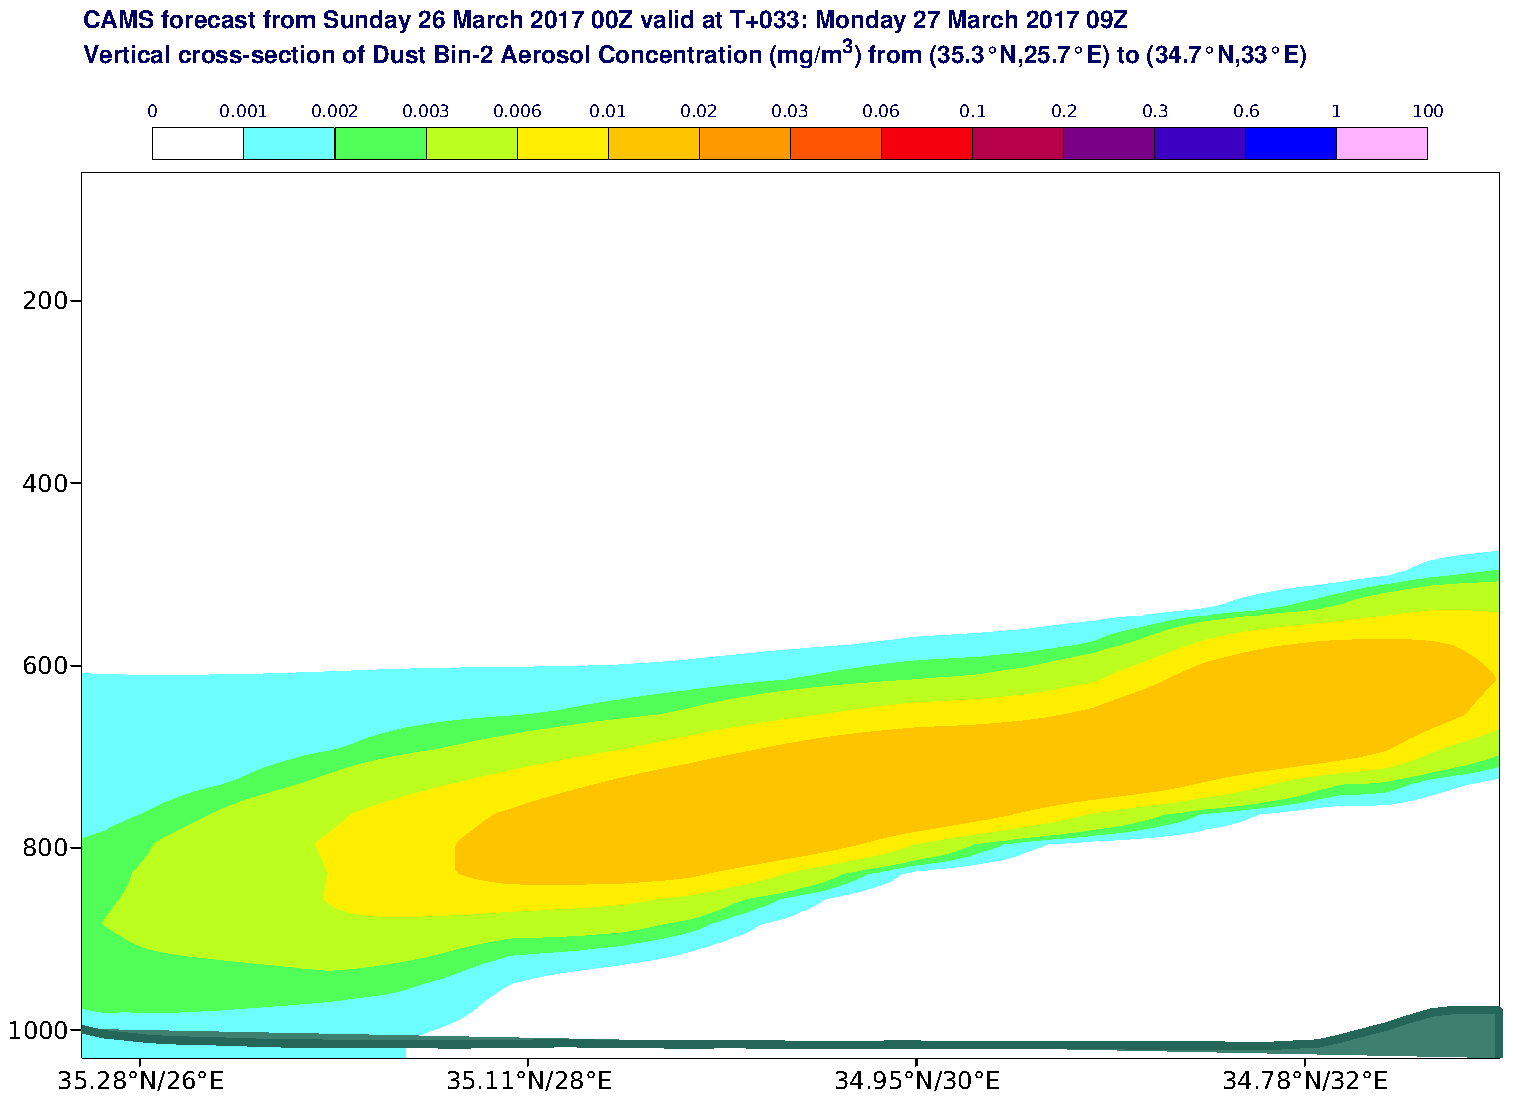 Vertical cross-section of Dust Bin-2 Aerosol Concentration (mg/m3) valid at T33 - 2017-03-27 09:00